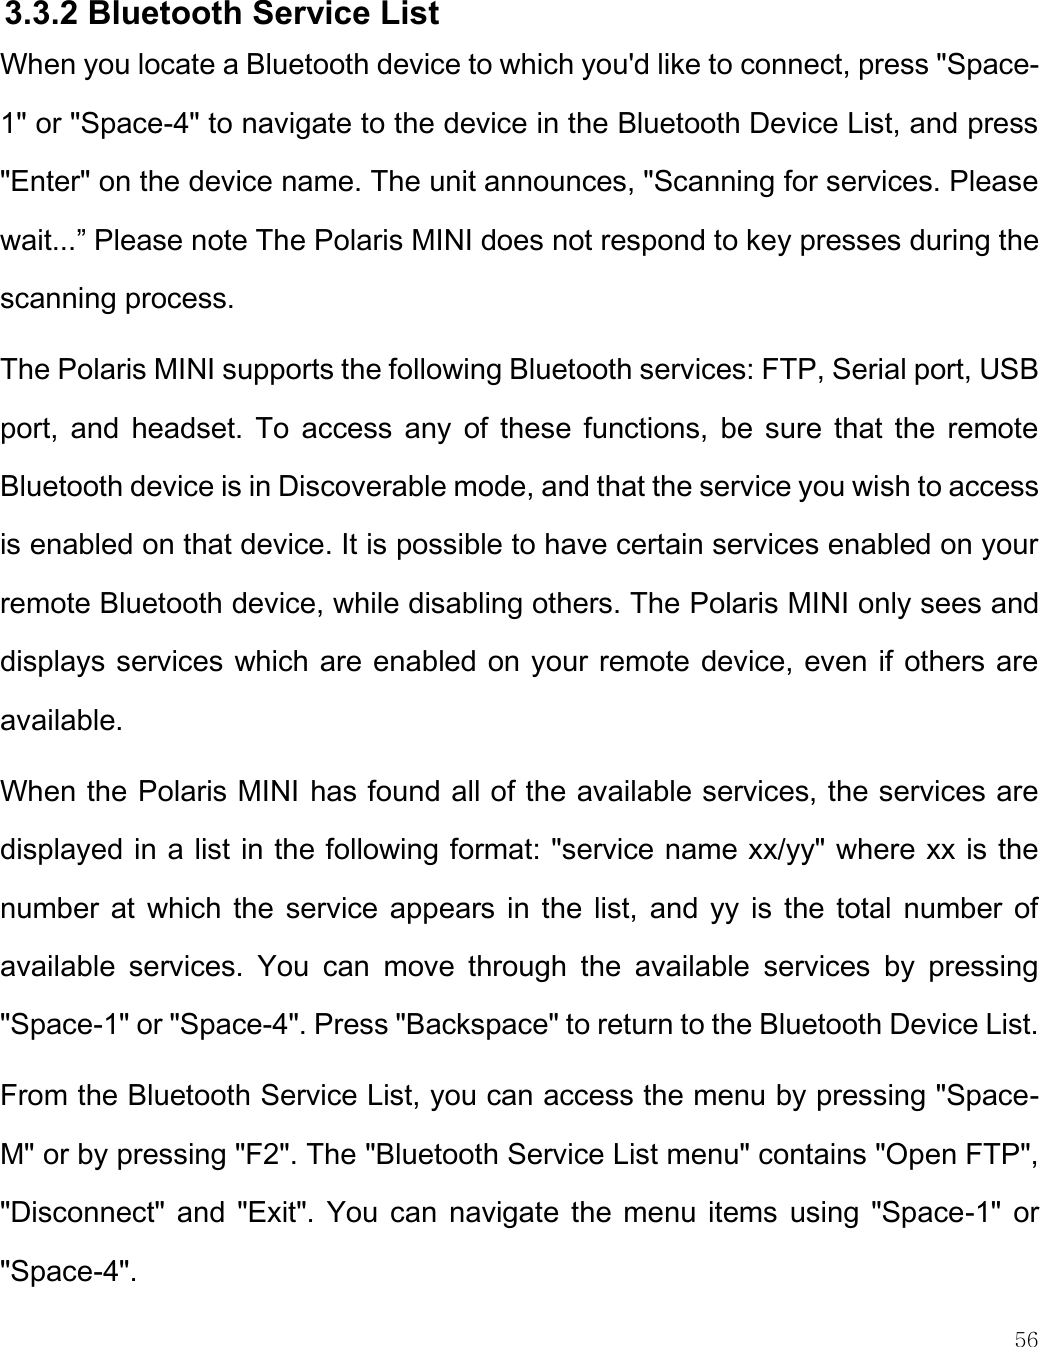    56   3.3.2 Bluetooth Service List When you locate a Bluetooth device to which you&apos;d like to connect, press &quot;Space-1&quot; or &quot;Space-4&quot; to navigate to the device in the Bluetooth Device List, and press &quot;Enter&quot; on the device name. The unit announces, &quot;Scanning for services. Please wait...” Please note The Polaris MINI does not respond to key presses during the scanning process.  The Polaris MINI supports the following Bluetooth services: FTP, Serial port, USB port,  and  headset. To access  any  of  these  functions,  be  sure  that the remote Bluetooth device is in Discoverable mode, and that the service you wish to access is enabled on that device. It is possible to have certain services enabled on your remote Bluetooth device, while disabling others. The Polaris MINI only sees and displays services which are enabled on your remote device, even if others are available.  When the Polaris MINI has found all of the available services, the services are displayed in a list in the following format: &quot;service name xx/yy&quot; where xx is the number at which the service appears in the list, and yy  is  the total number of available  services.  You  can  move  through  the  available  services  by  pressing &quot;Space-1&quot; or &quot;Space-4&quot;. Press &quot;Backspace&quot; to return to the Bluetooth Device List. From the Bluetooth Service List, you can access the menu by pressing &quot;Space-M&quot; or by pressing &quot;F2&quot;. The &quot;Bluetooth Service List menu&quot; contains &quot;Open FTP&quot;, &quot;Disconnect&quot; and &quot;Exit&quot;. You can navigate the menu items using &quot;Space-1&quot; or &quot;Space-4&quot;. 